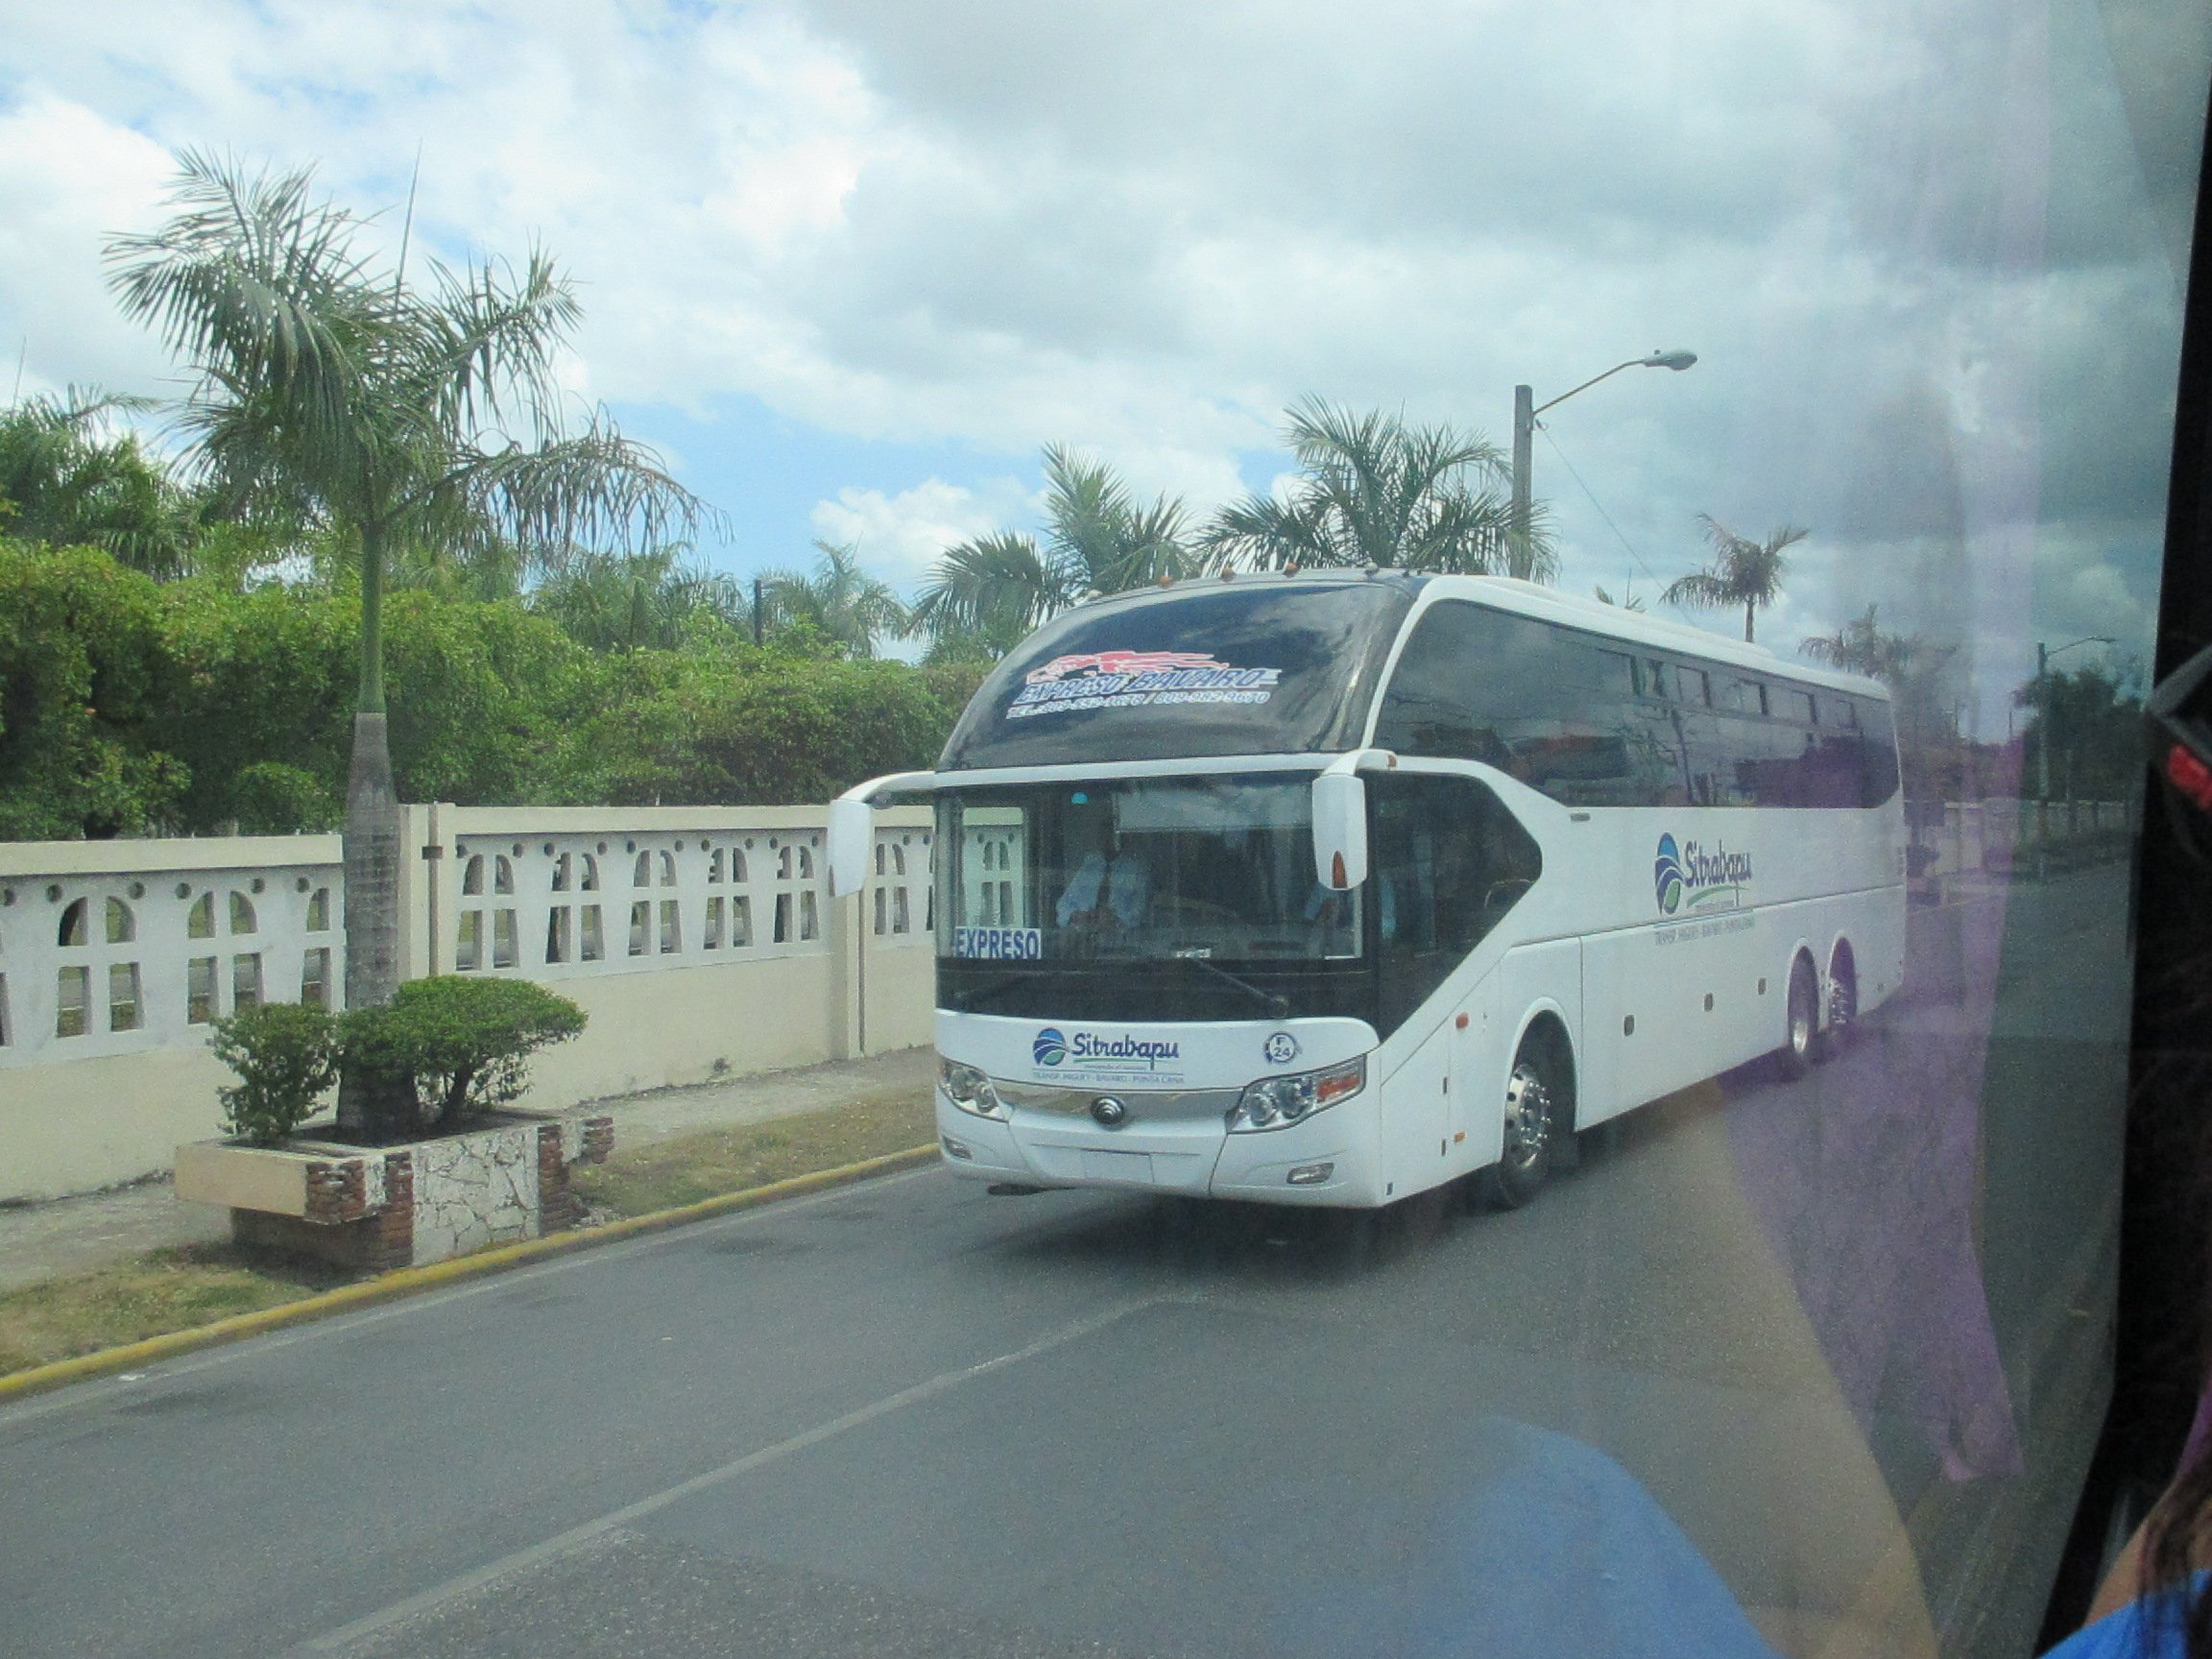 How To Get From Sosua to Punta Cana Airport - All Possible Ways, cheapest way from Sosua to Punta Cana, Sosua to Punta Cana, Sosua Beach to Punta Cana bus, Sosua to Punta Cana Airport, Caribe Tours Sosua to Punta Cana, Metro Bus Sosua to Punta Cana